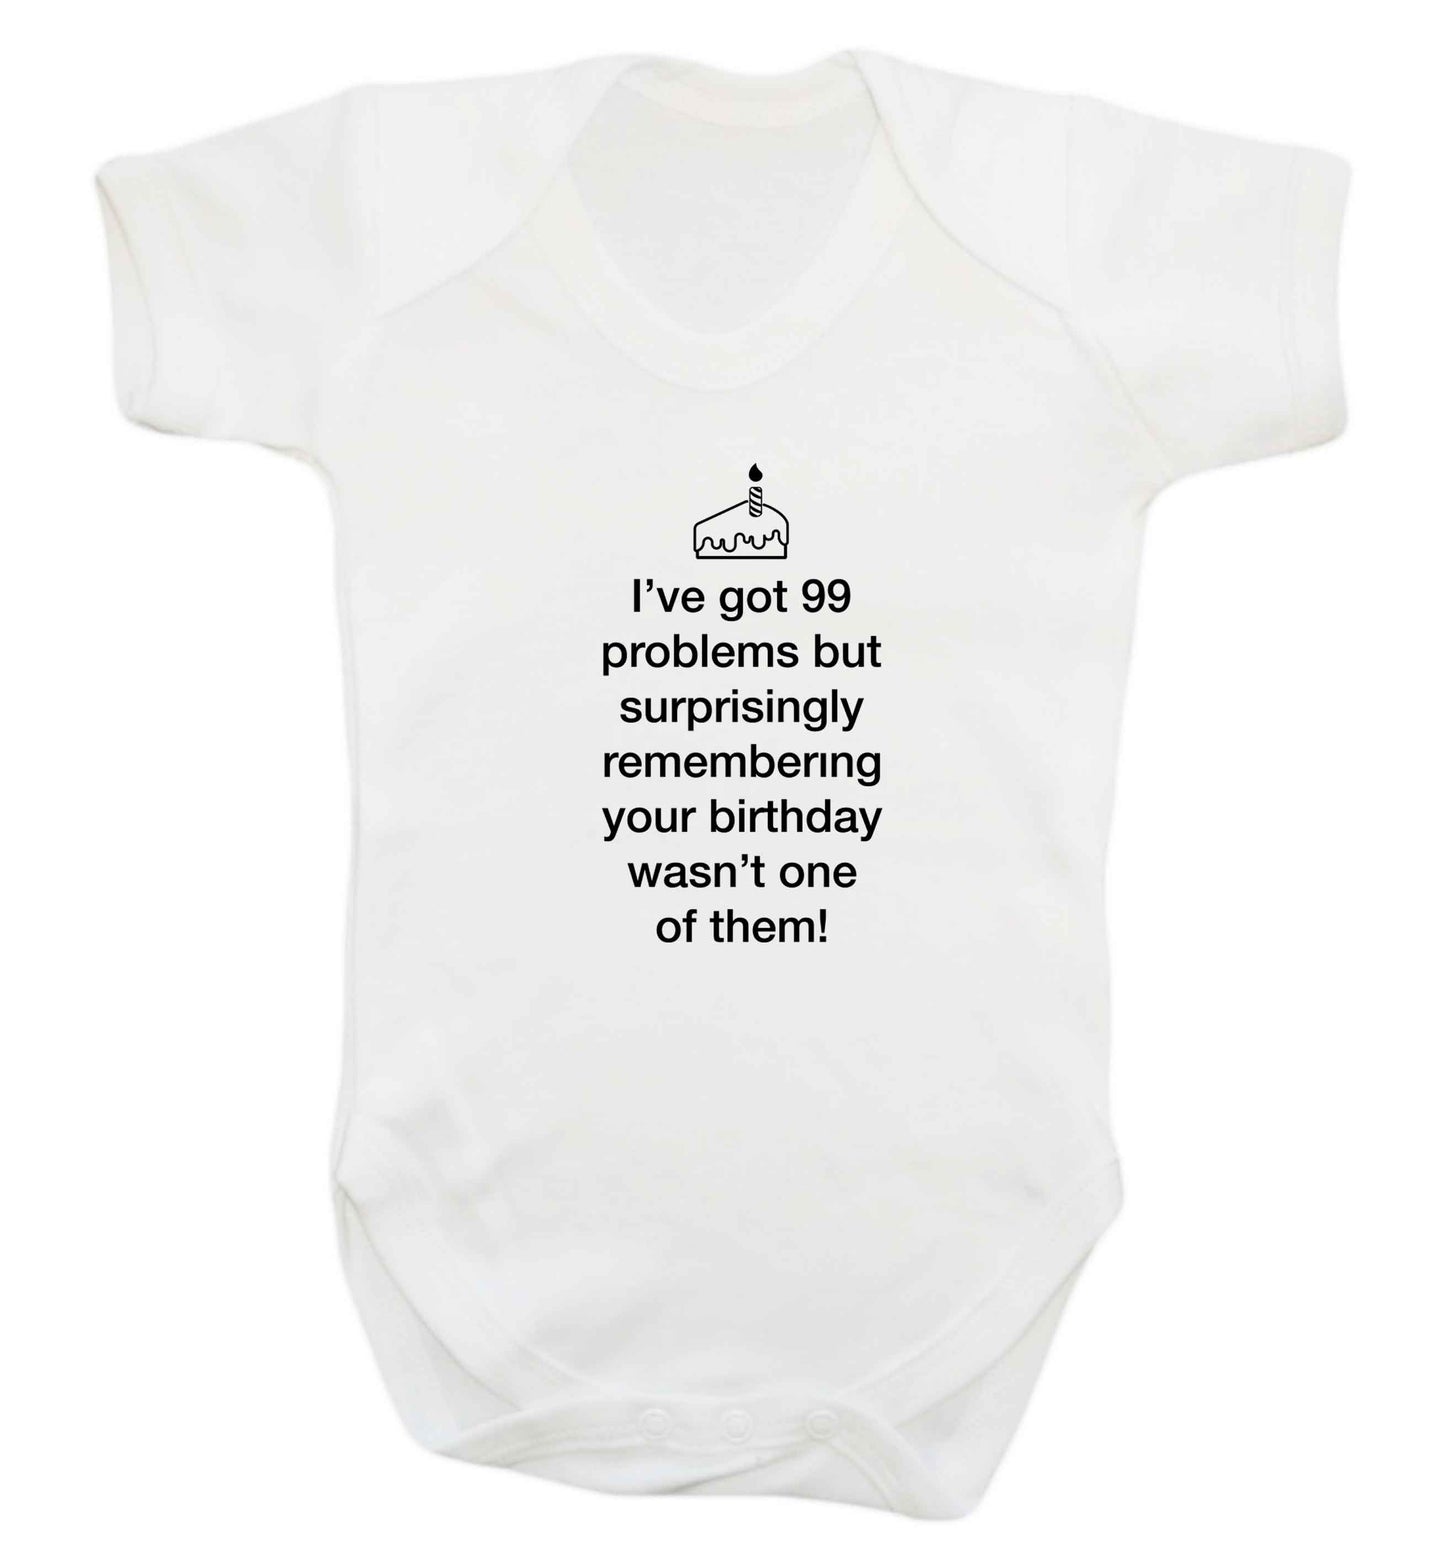 I've got 99 problems but surprisingly remembering your birthday wasn't one of them! baby vest white 18-24 months